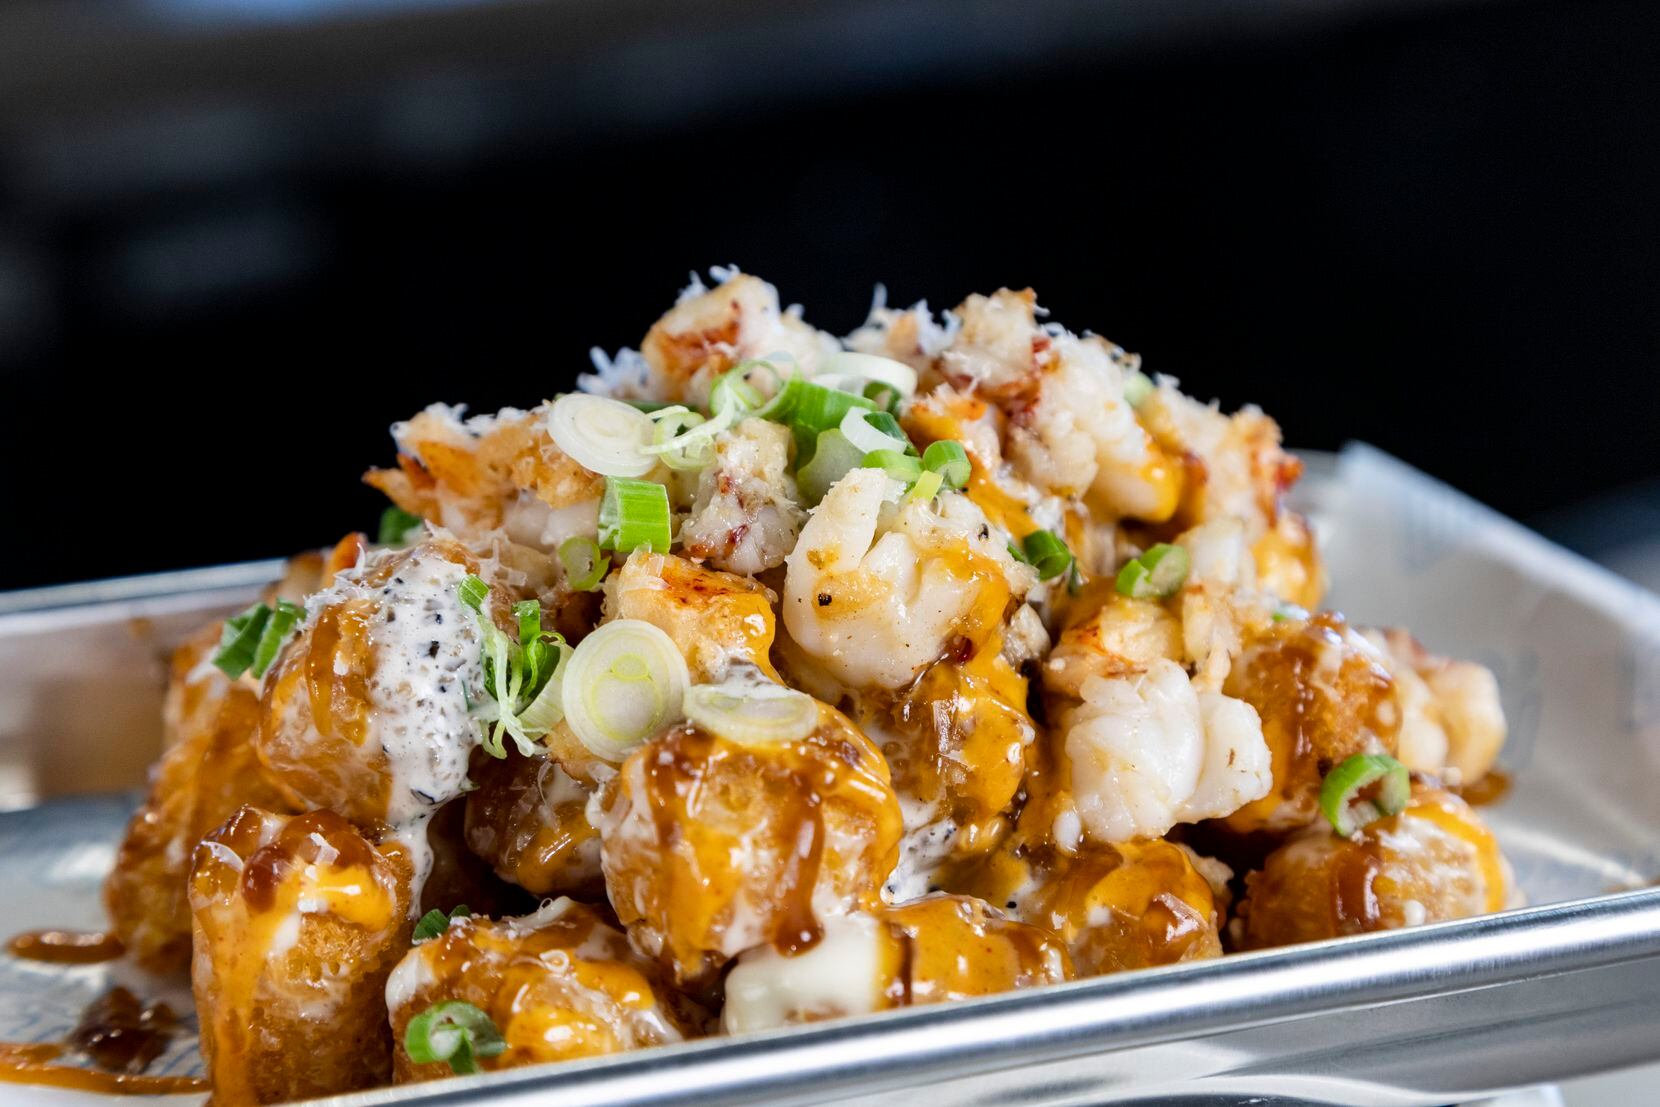 Lobster tots = serious.